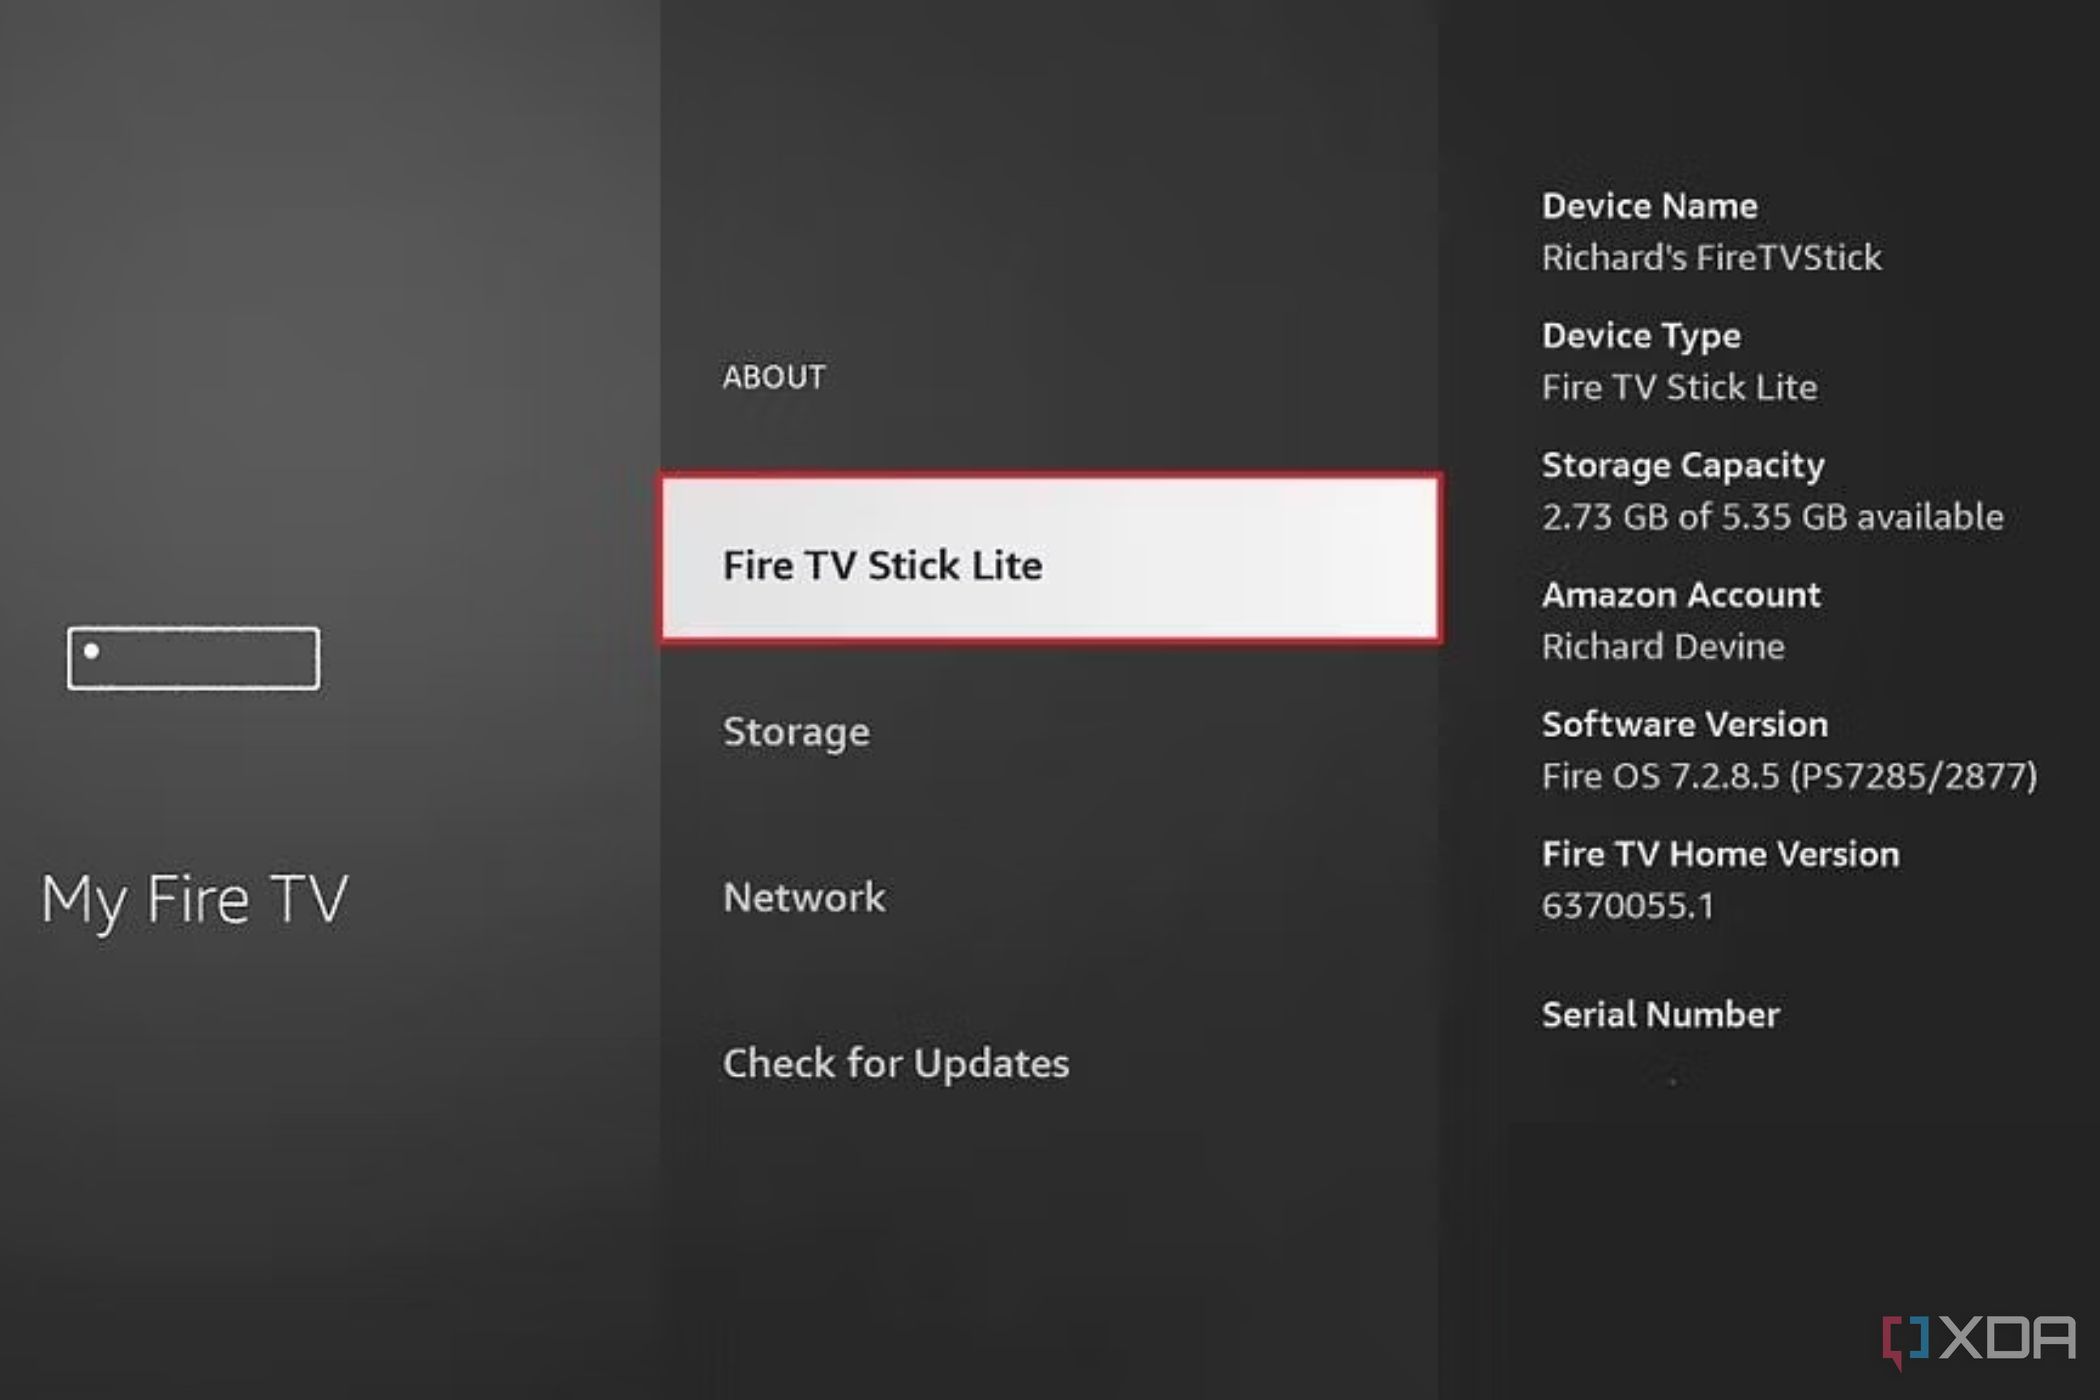 A screenshot showing the highlighted Fire TV Stick Lite device options in Fire TV.